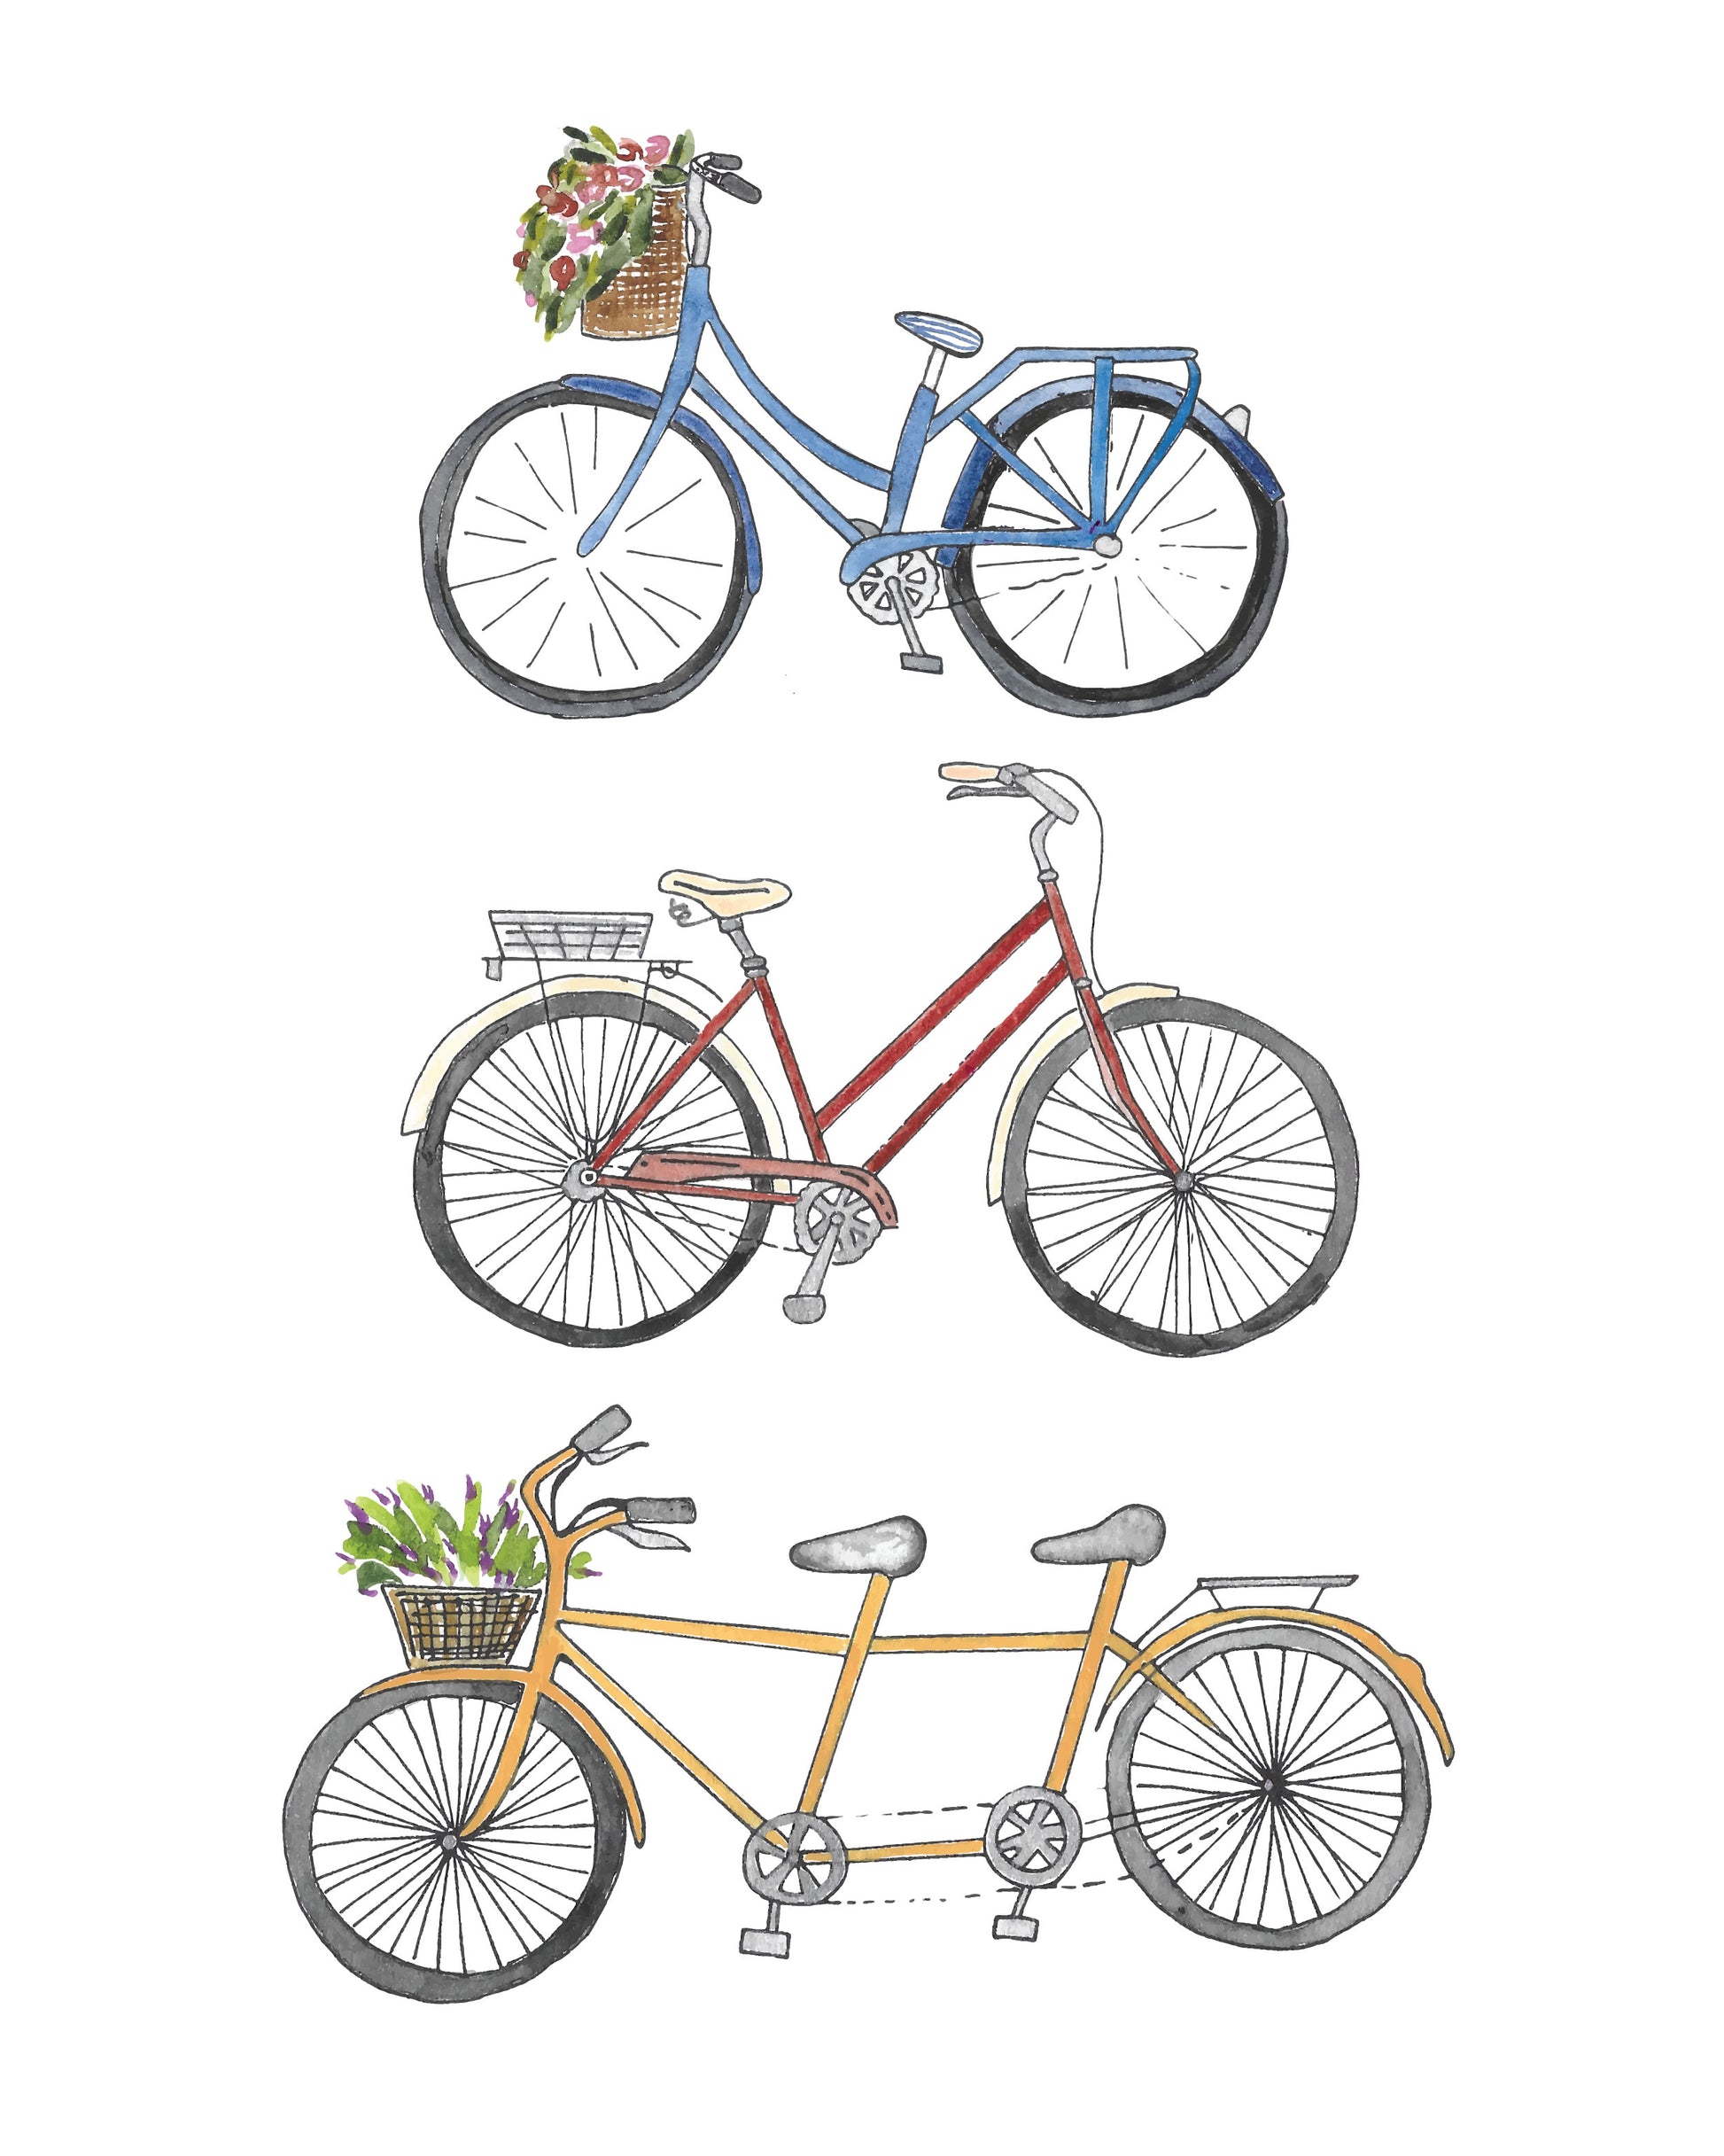 This bike print by Abigail Powers is a great addition to any home that loves the feeling of riding around with the wind in your hair and the sunshine in your face. The bikes are colorful and will make any bike lover smile. 